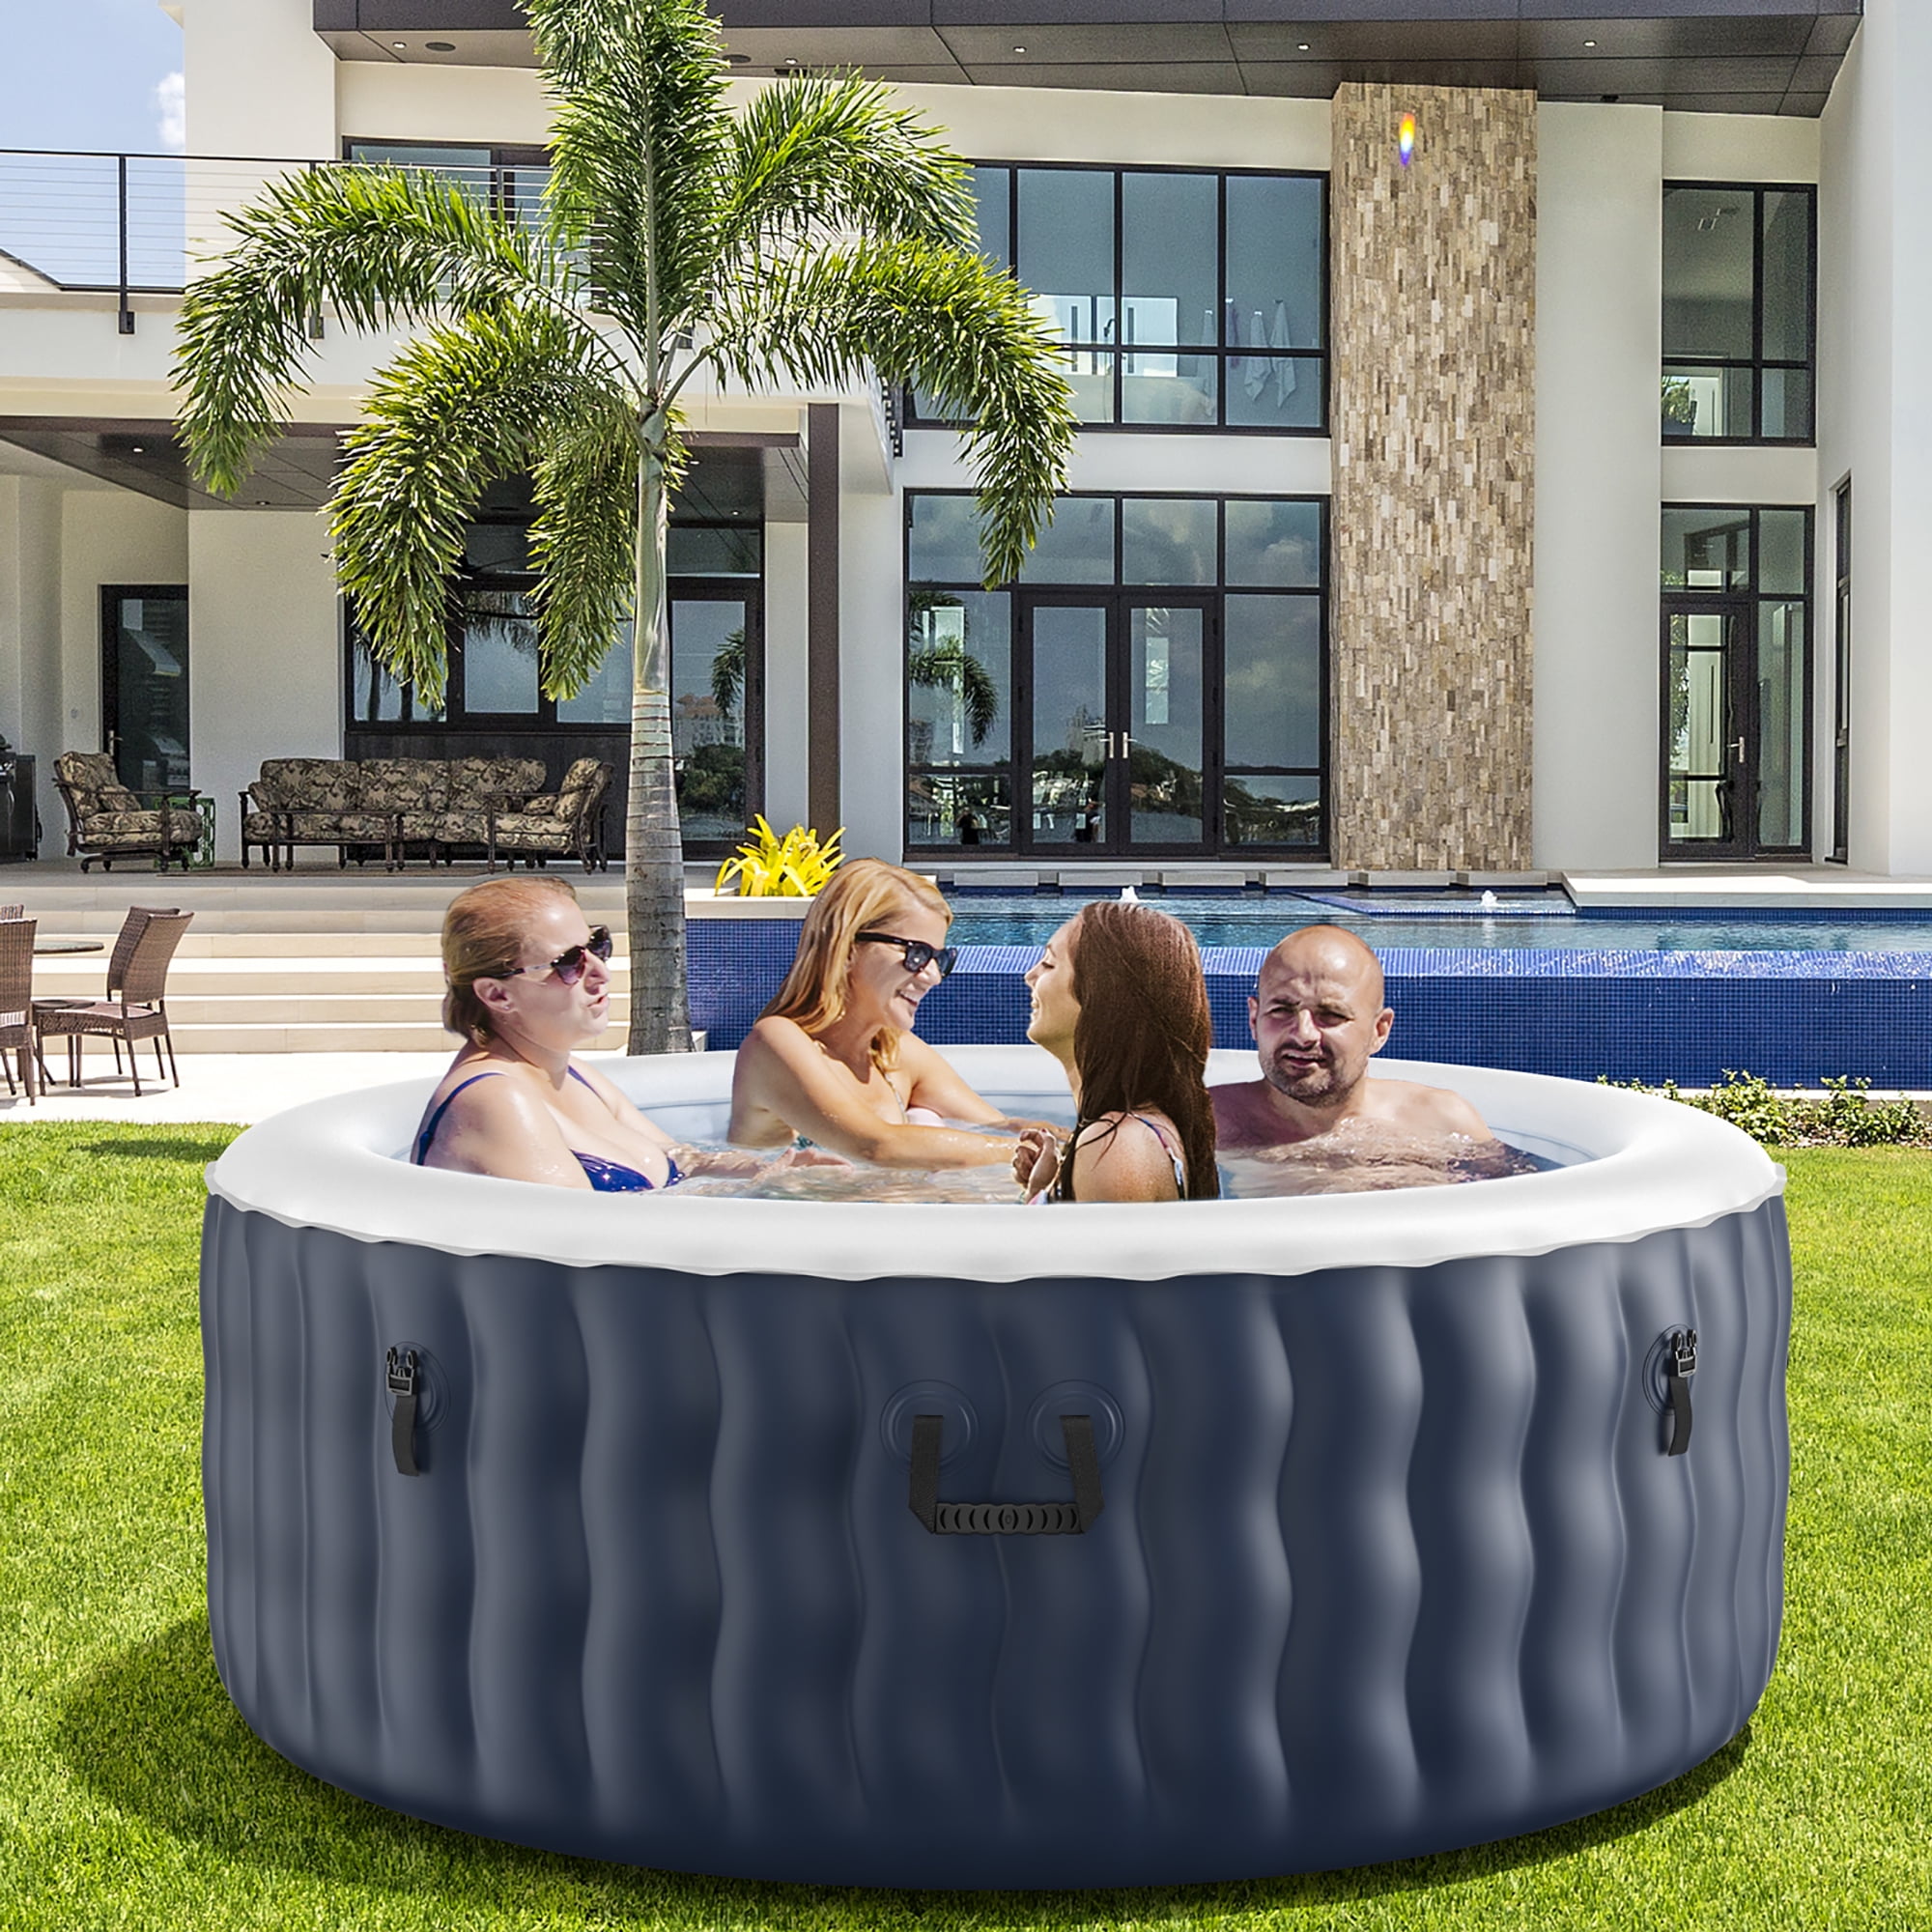 Komfott Hot Tub, 71” x 27” 4 Person Inflatable Hot Tub with 108 Bubble